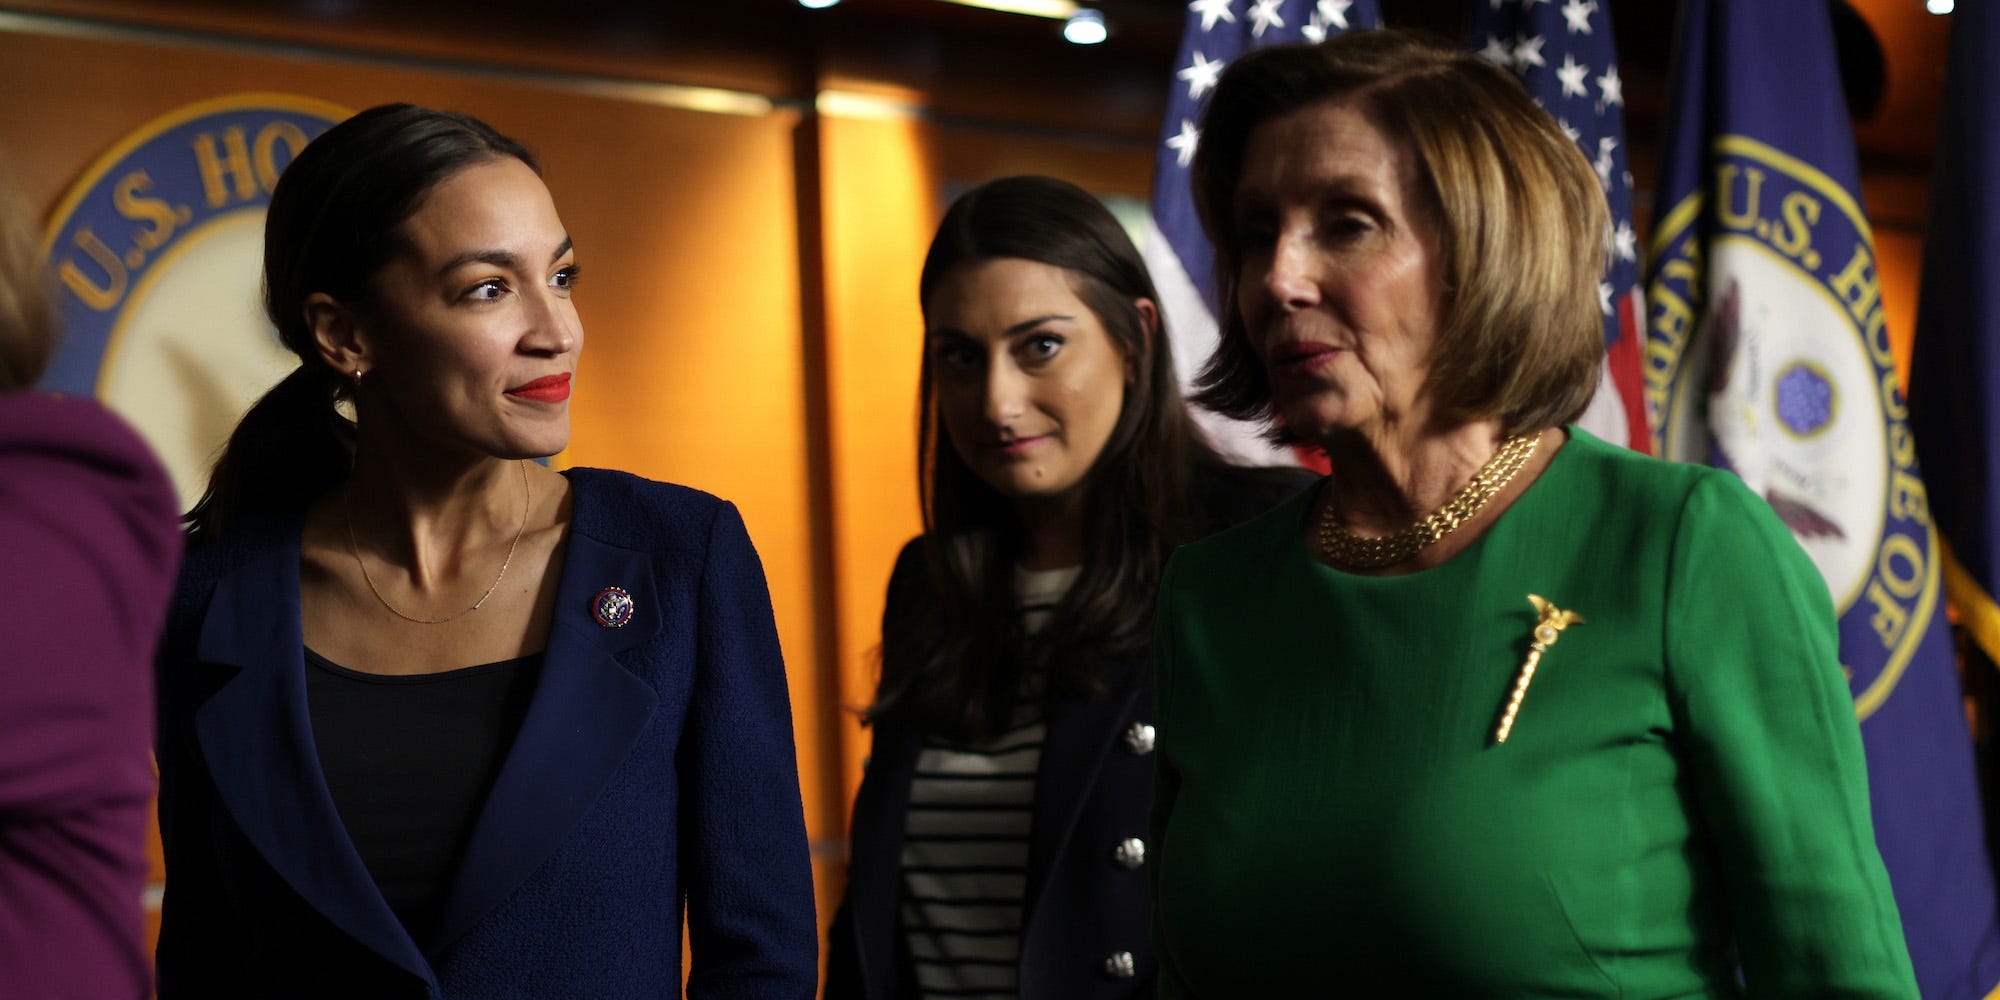 Democratic Rep. Alexandria Ocasio-Cortez of New York and House Speaker Nancy Pelosi at a news conference at the US Capitol on June 16, 2021.